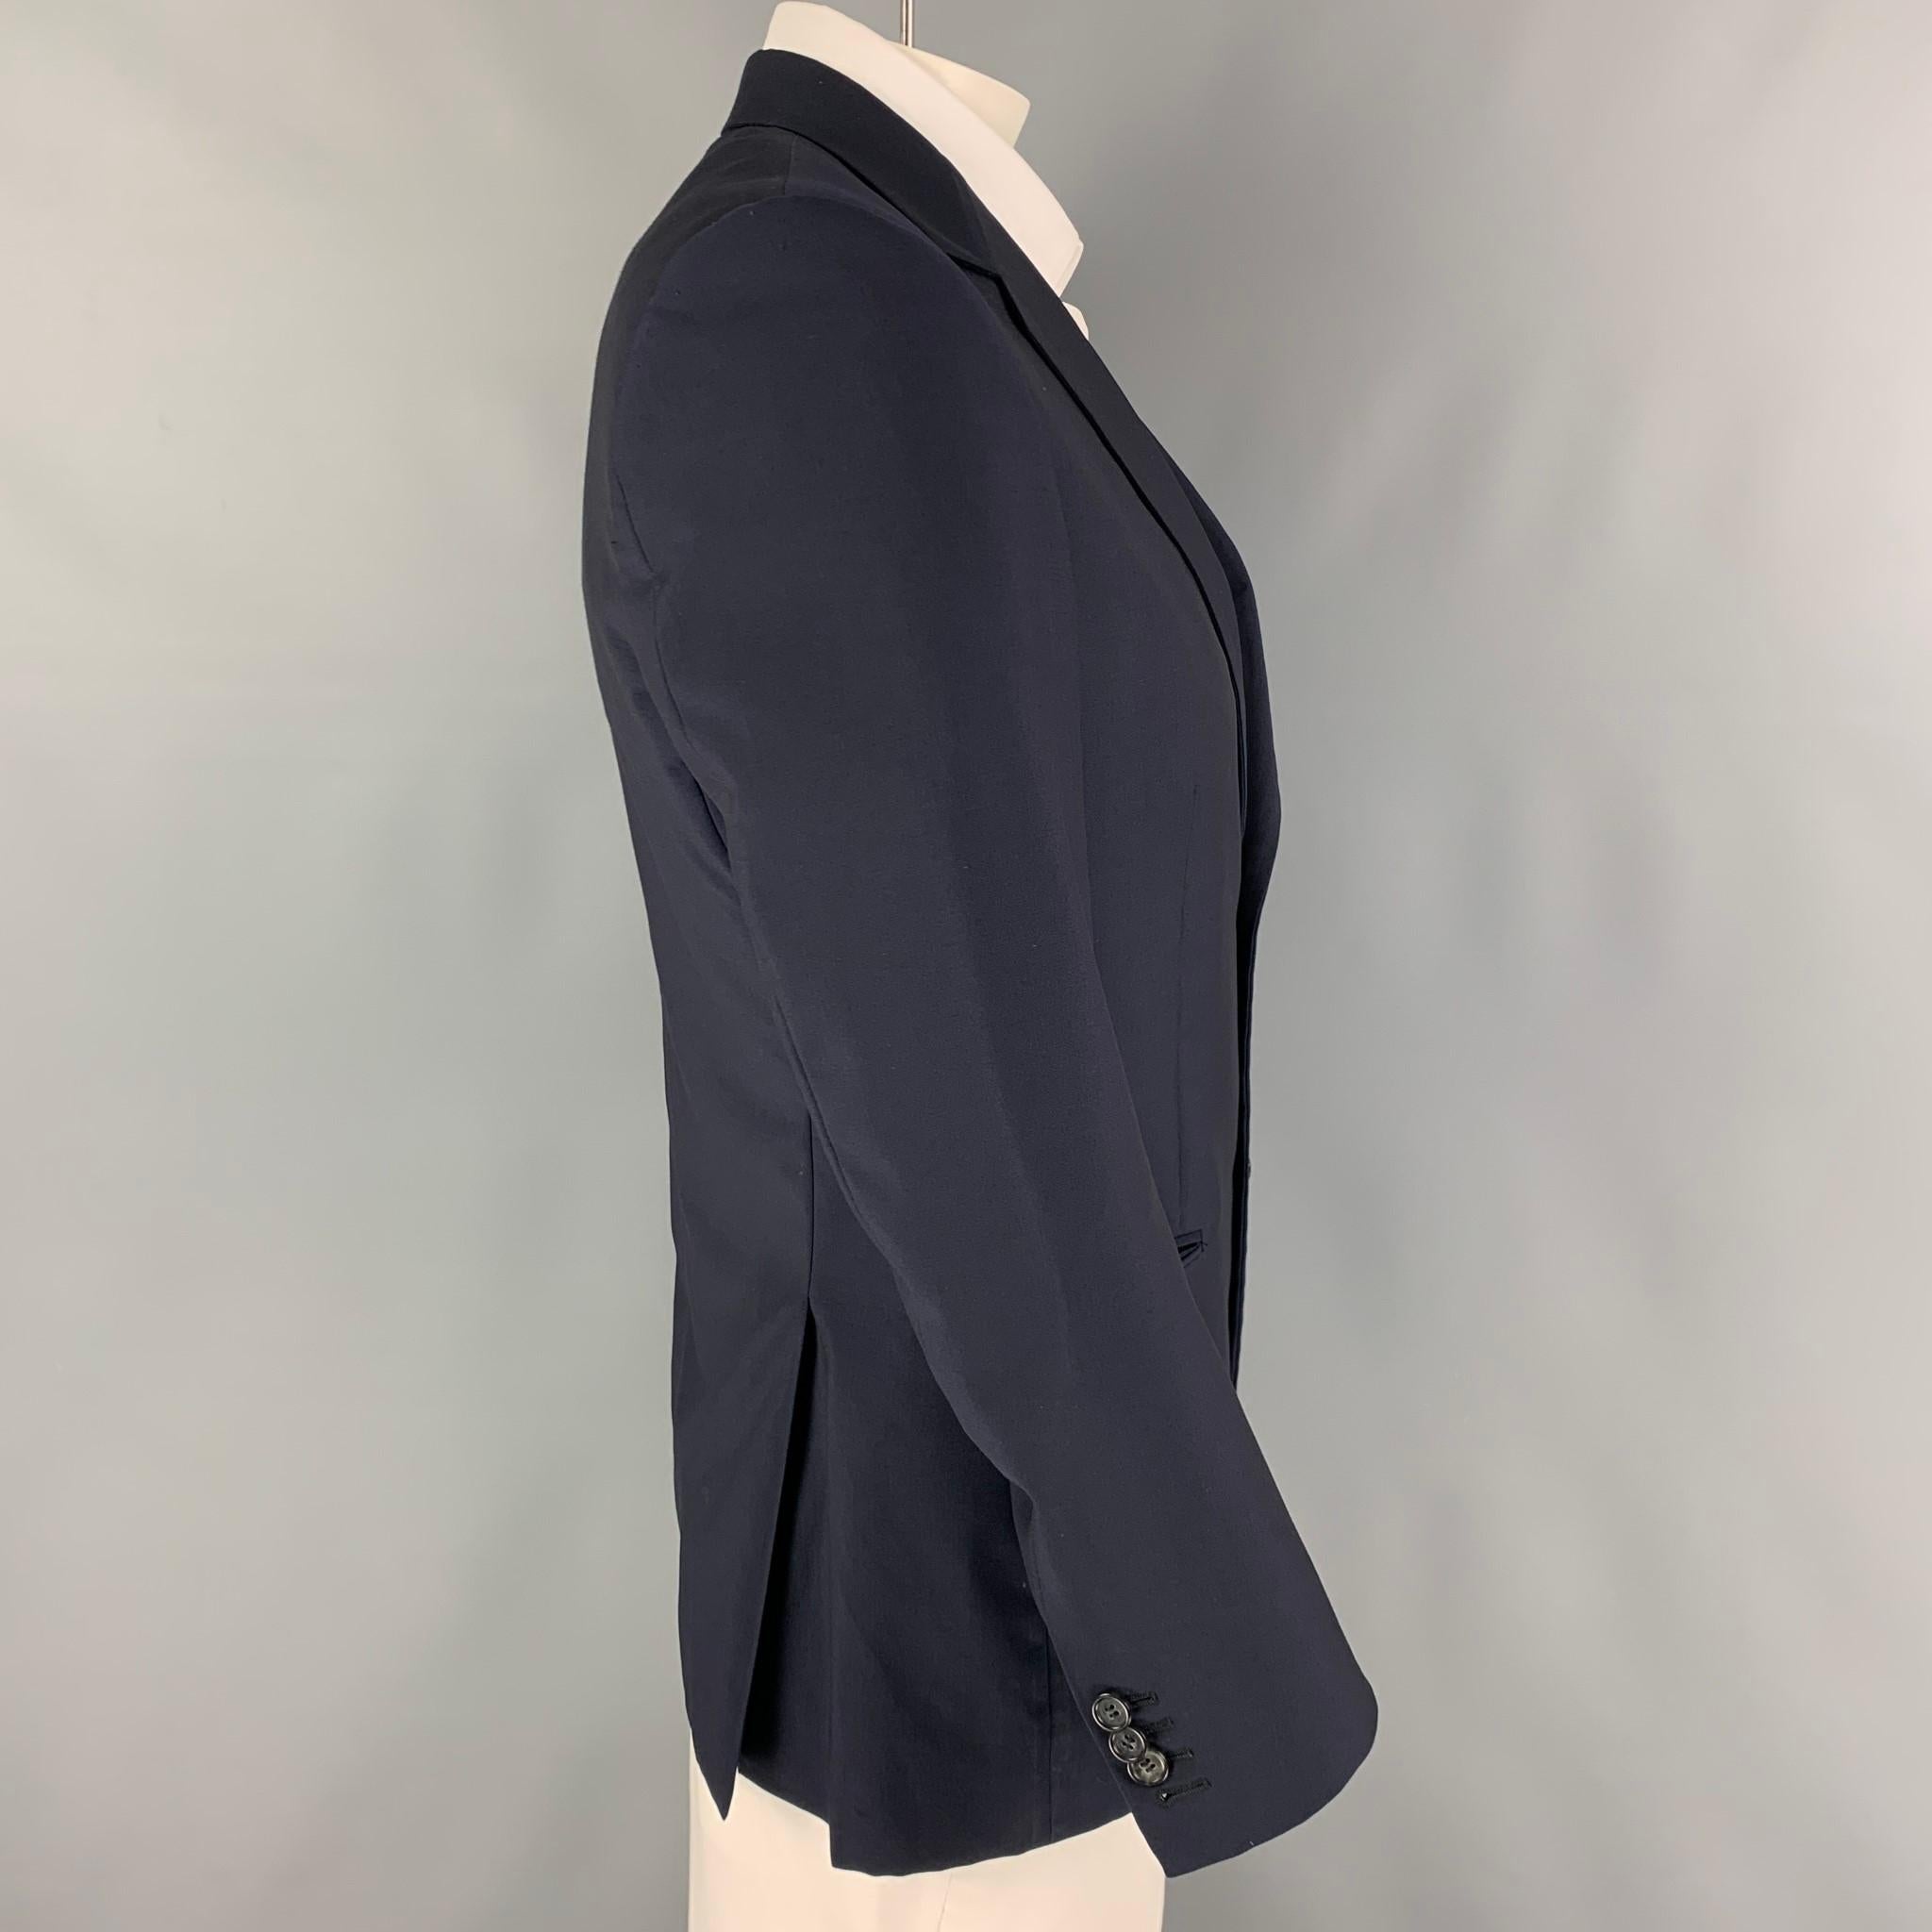 PRADA sport coat comes in a navy / wool with a full liner featuring a notch lapel, flap pockets, double back vent, and a double button closure. 

Excellent Pre-Owned Condition.
Marked: 52

Measurements:

Shoulder: 18 in.
Chest: 40 in.
Sleeve: 24